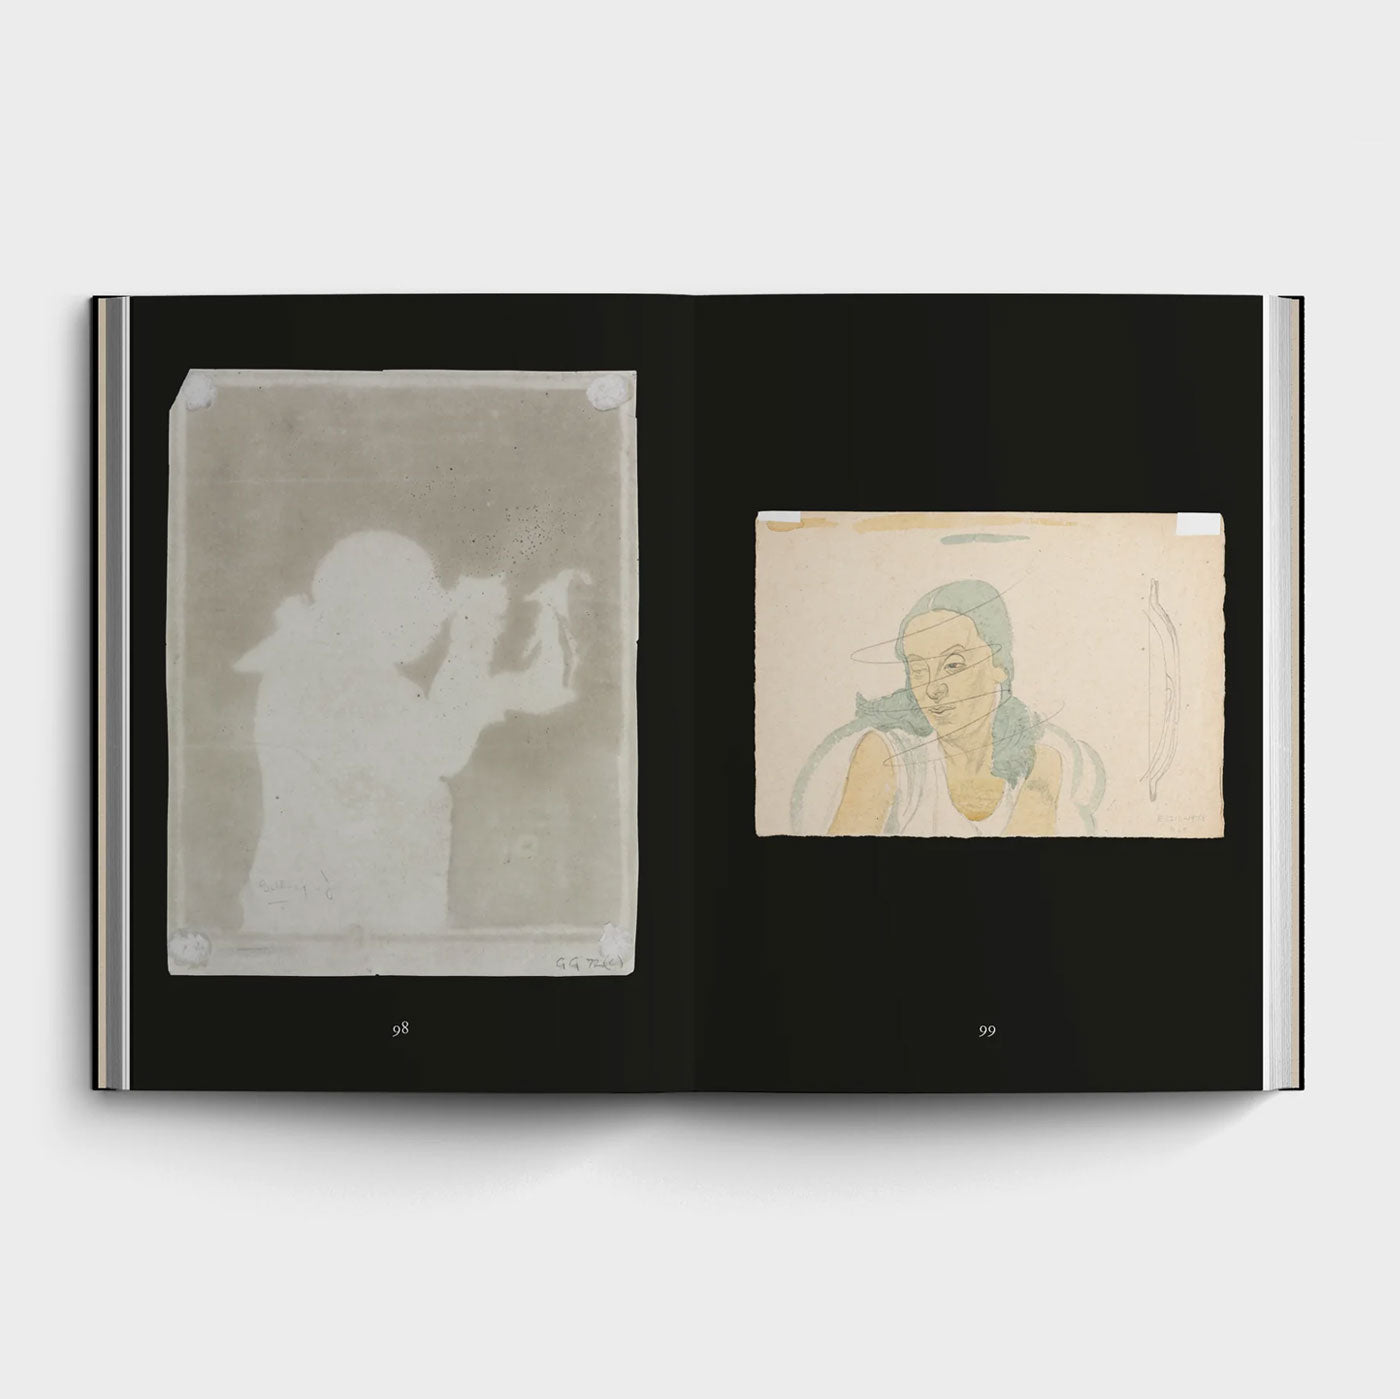 Reverses: Verso Works on Paper from The V&A Collection